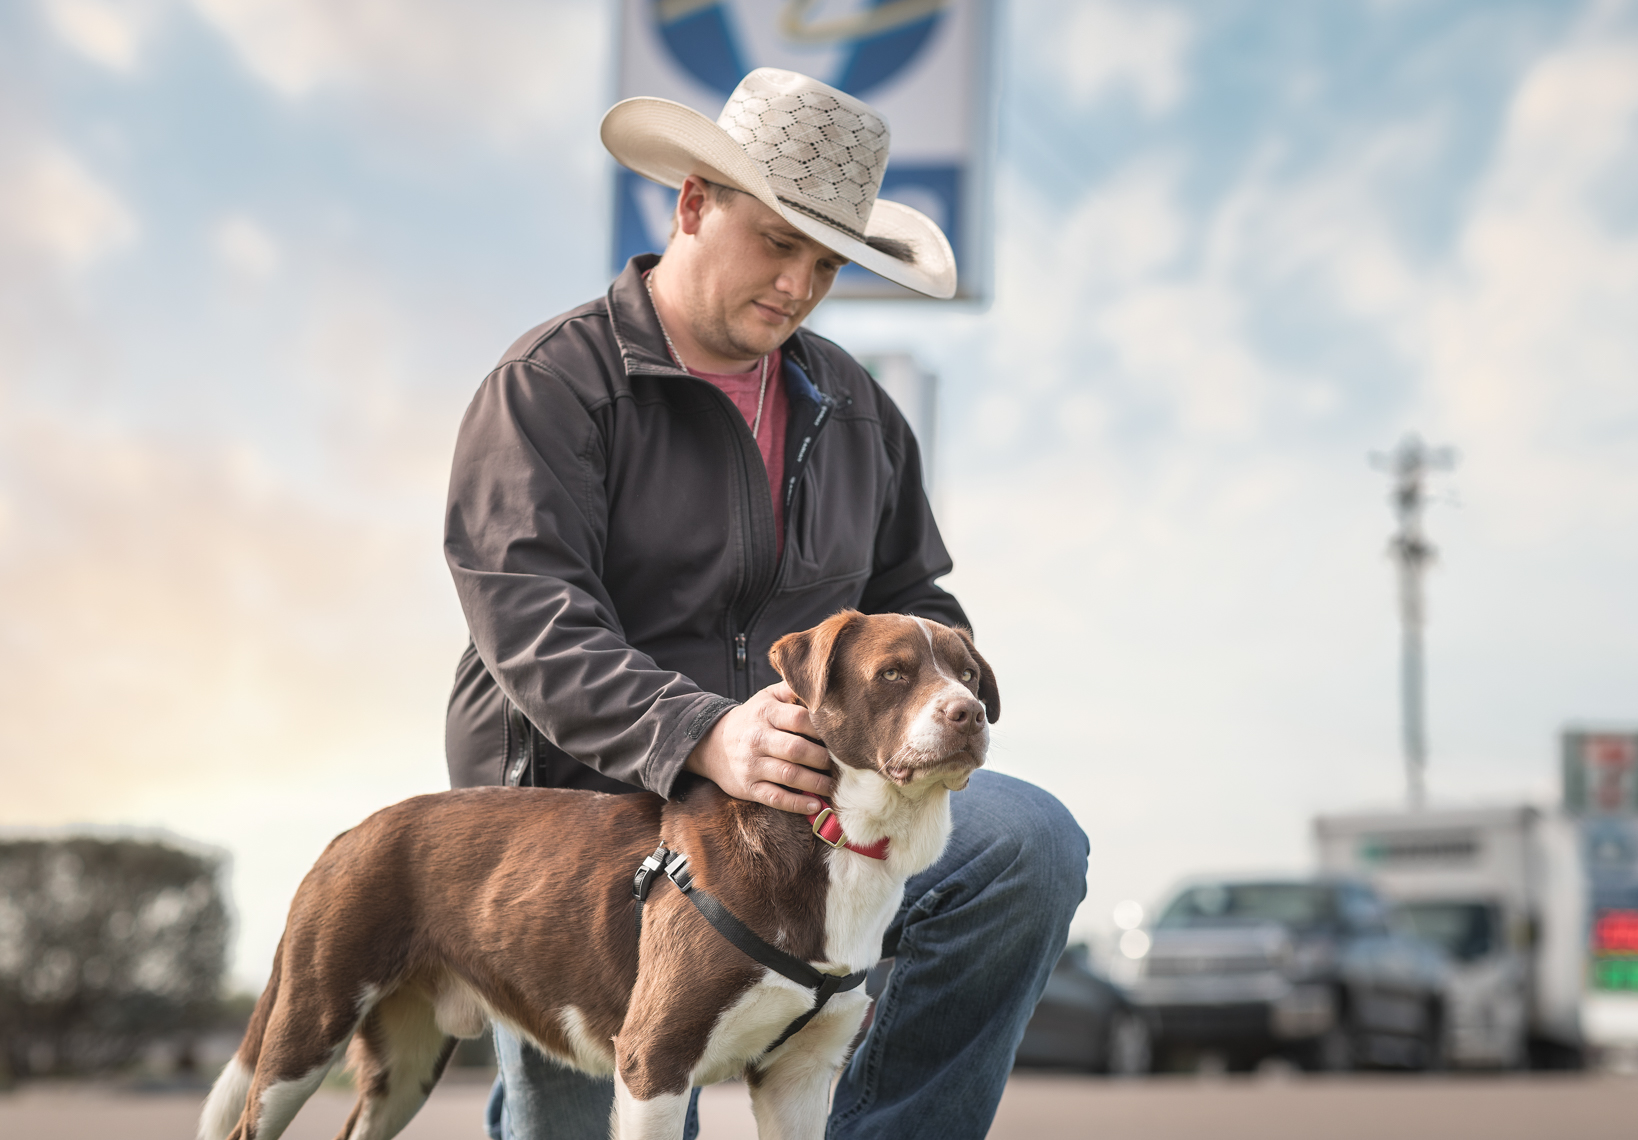 Man and Dog Photographed at Valero Gas Station by Lifestyle Photographer Jason Risner 